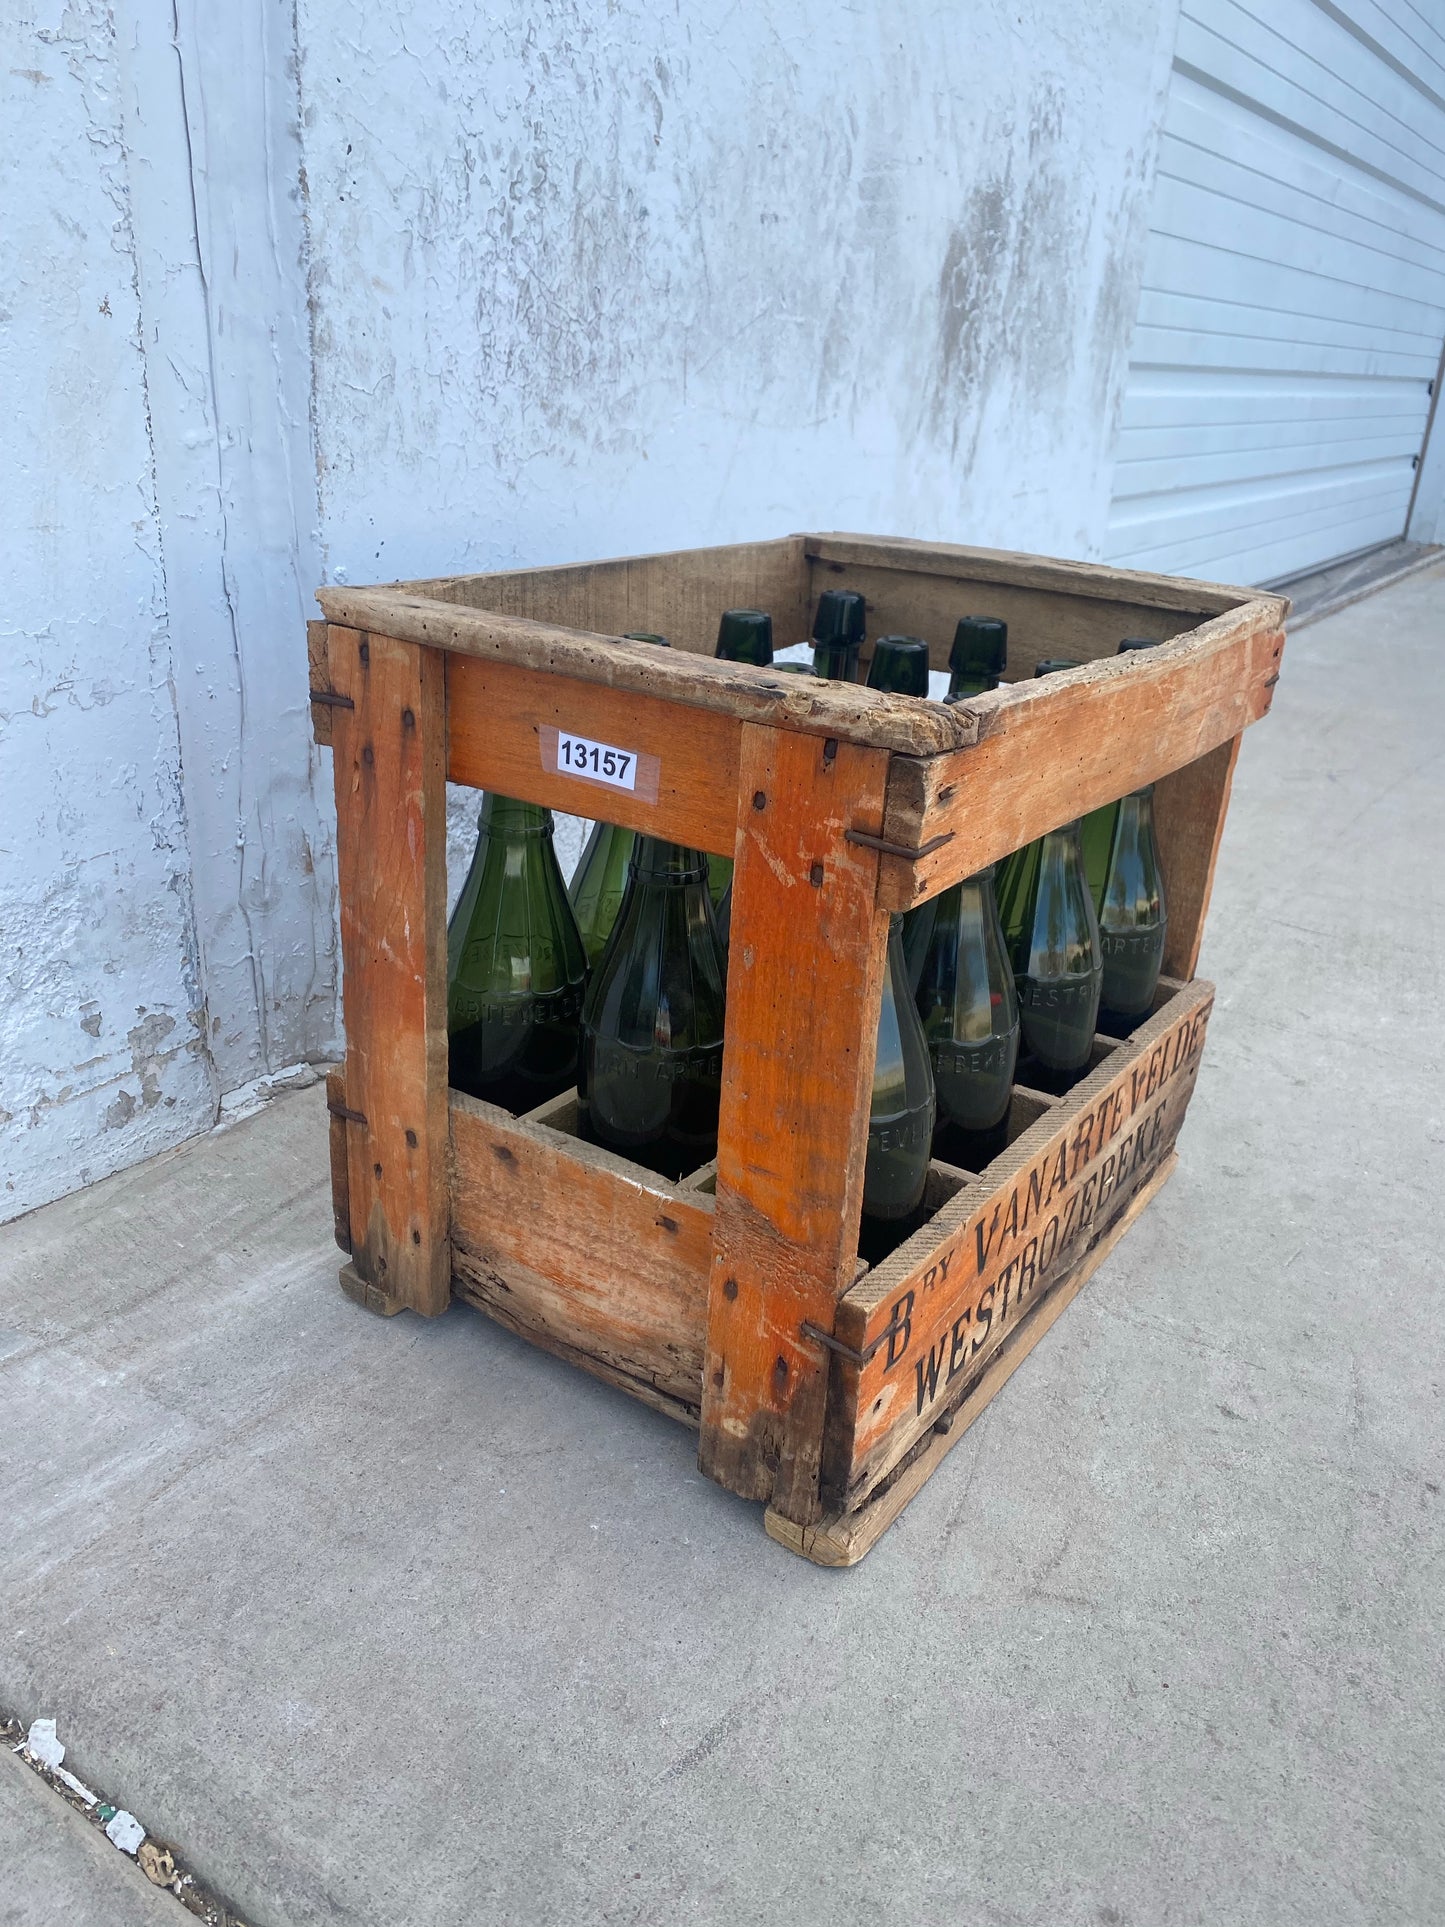 Wood Crate with Bottles